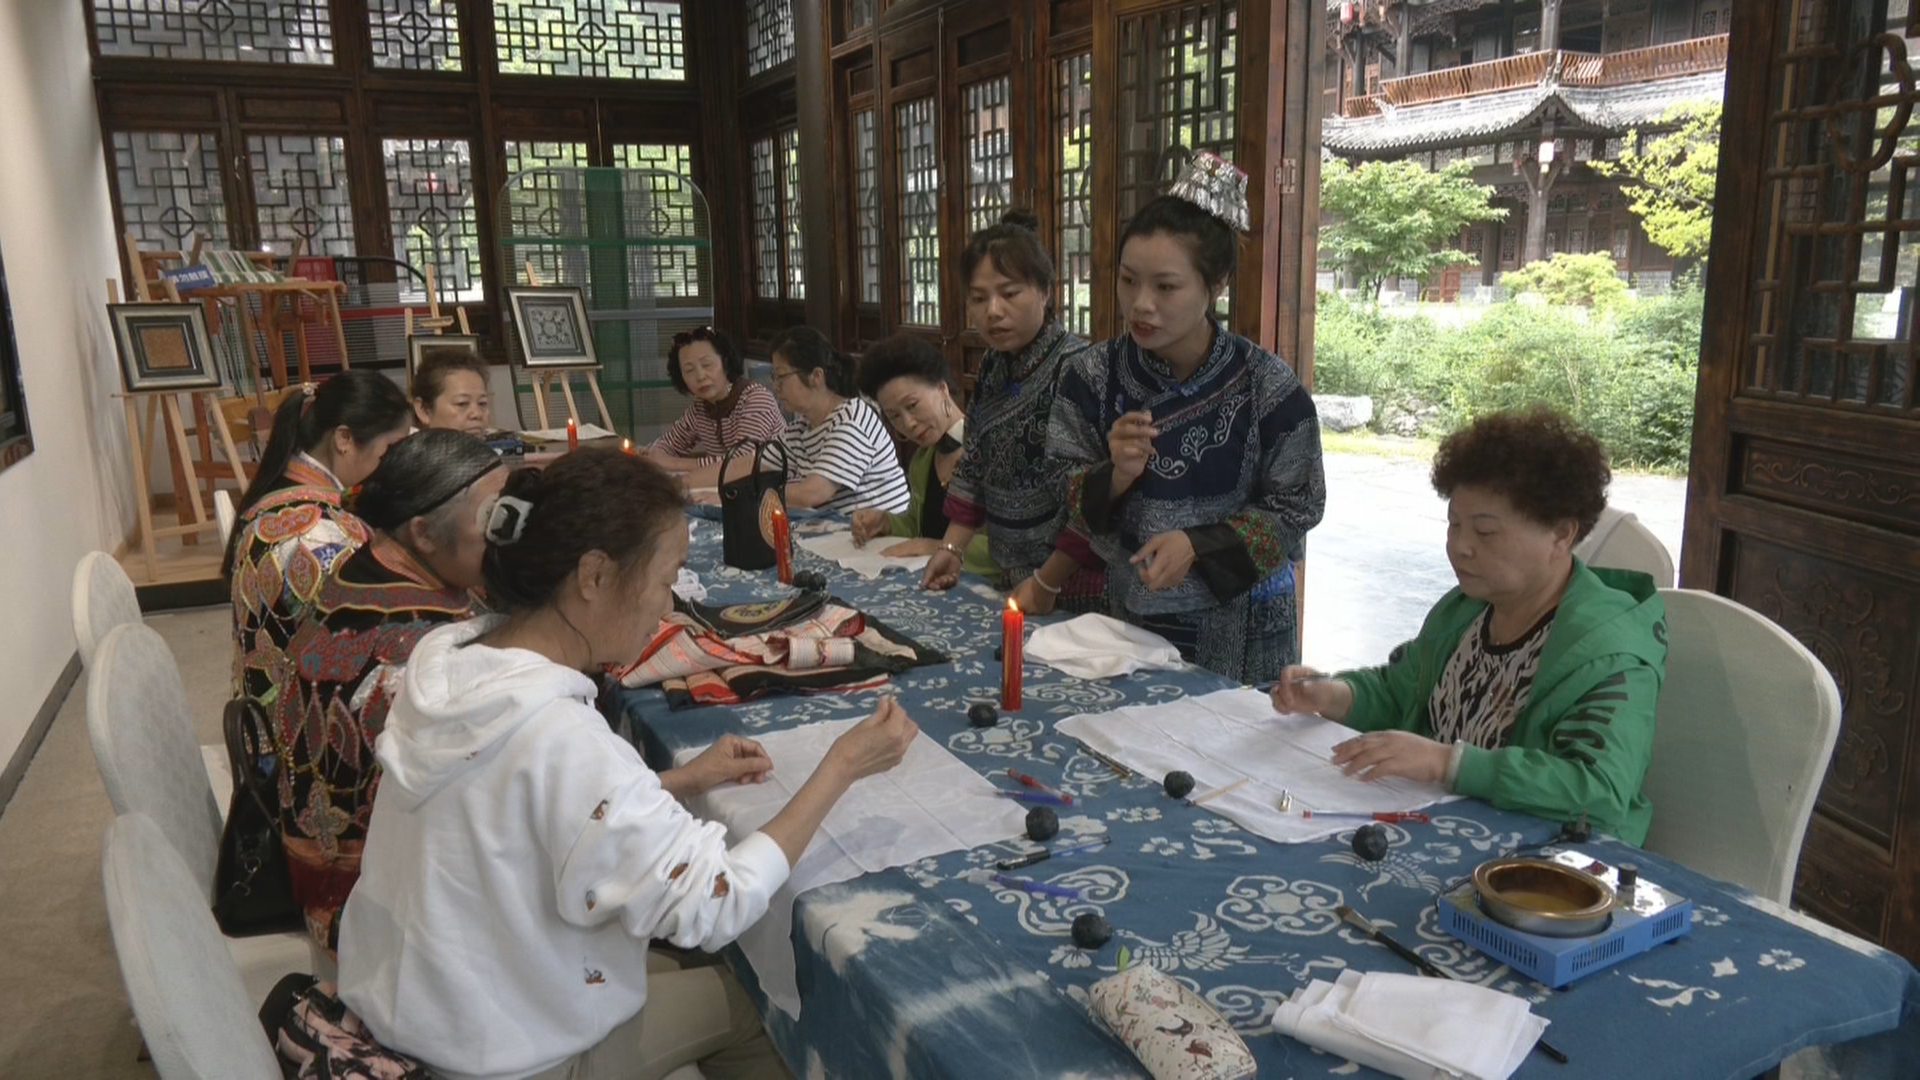  Guizhou News Network | [Cultural Tour in China] [Colorful Guizhou Cultural Treasure] Digital technology enables intangible cultural heritage skills to meet new opportunities for old crafts